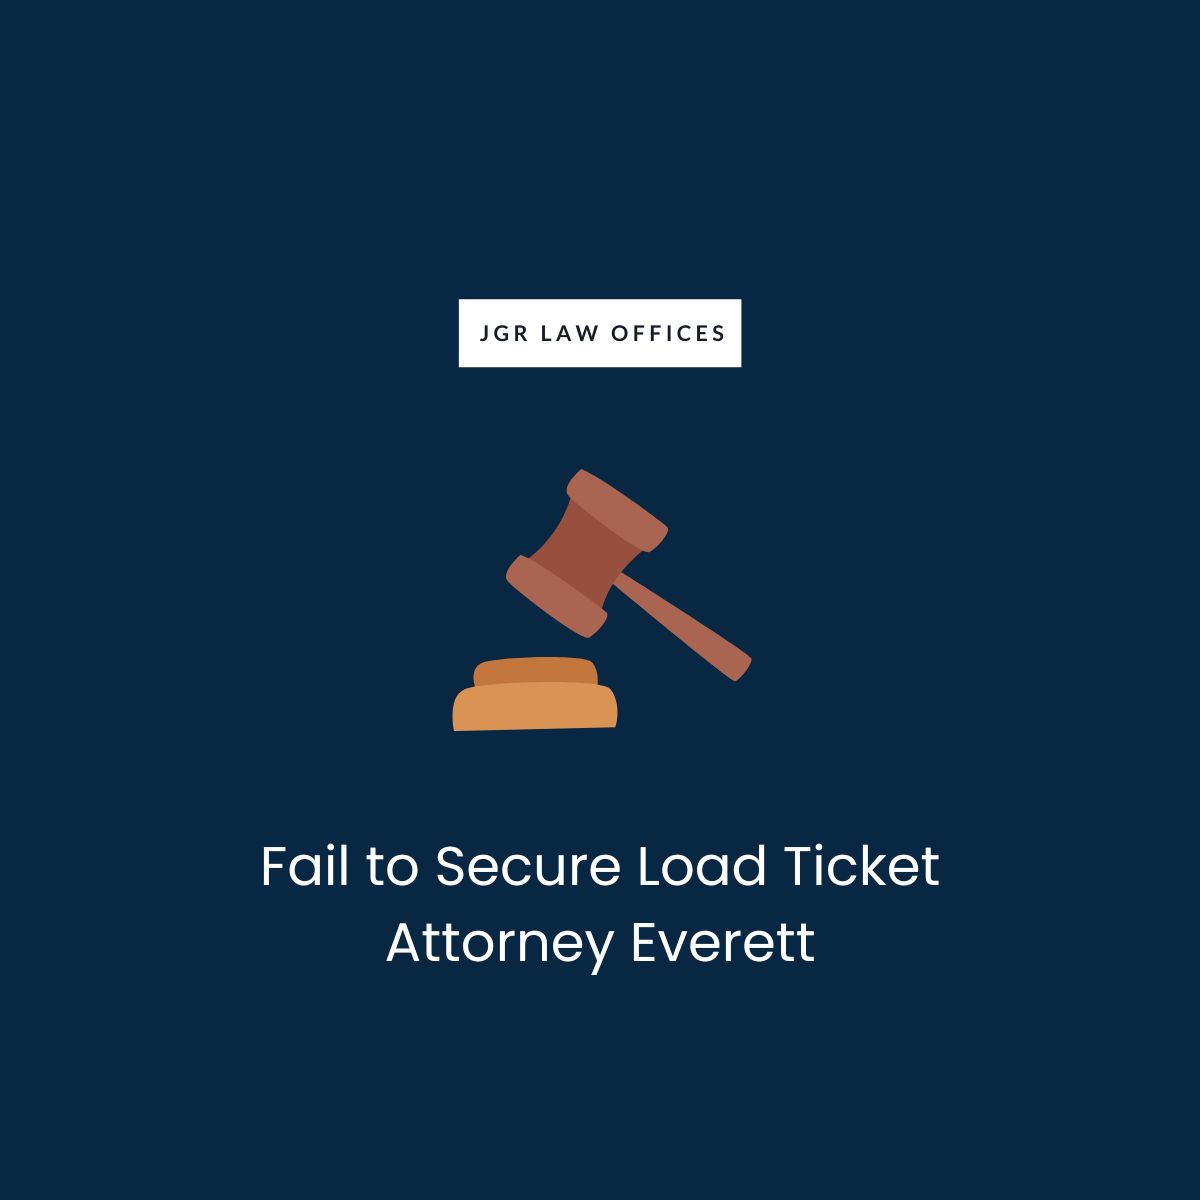 Fail to Secure Load Ticket Lawyer Everett Fail to Secure Load